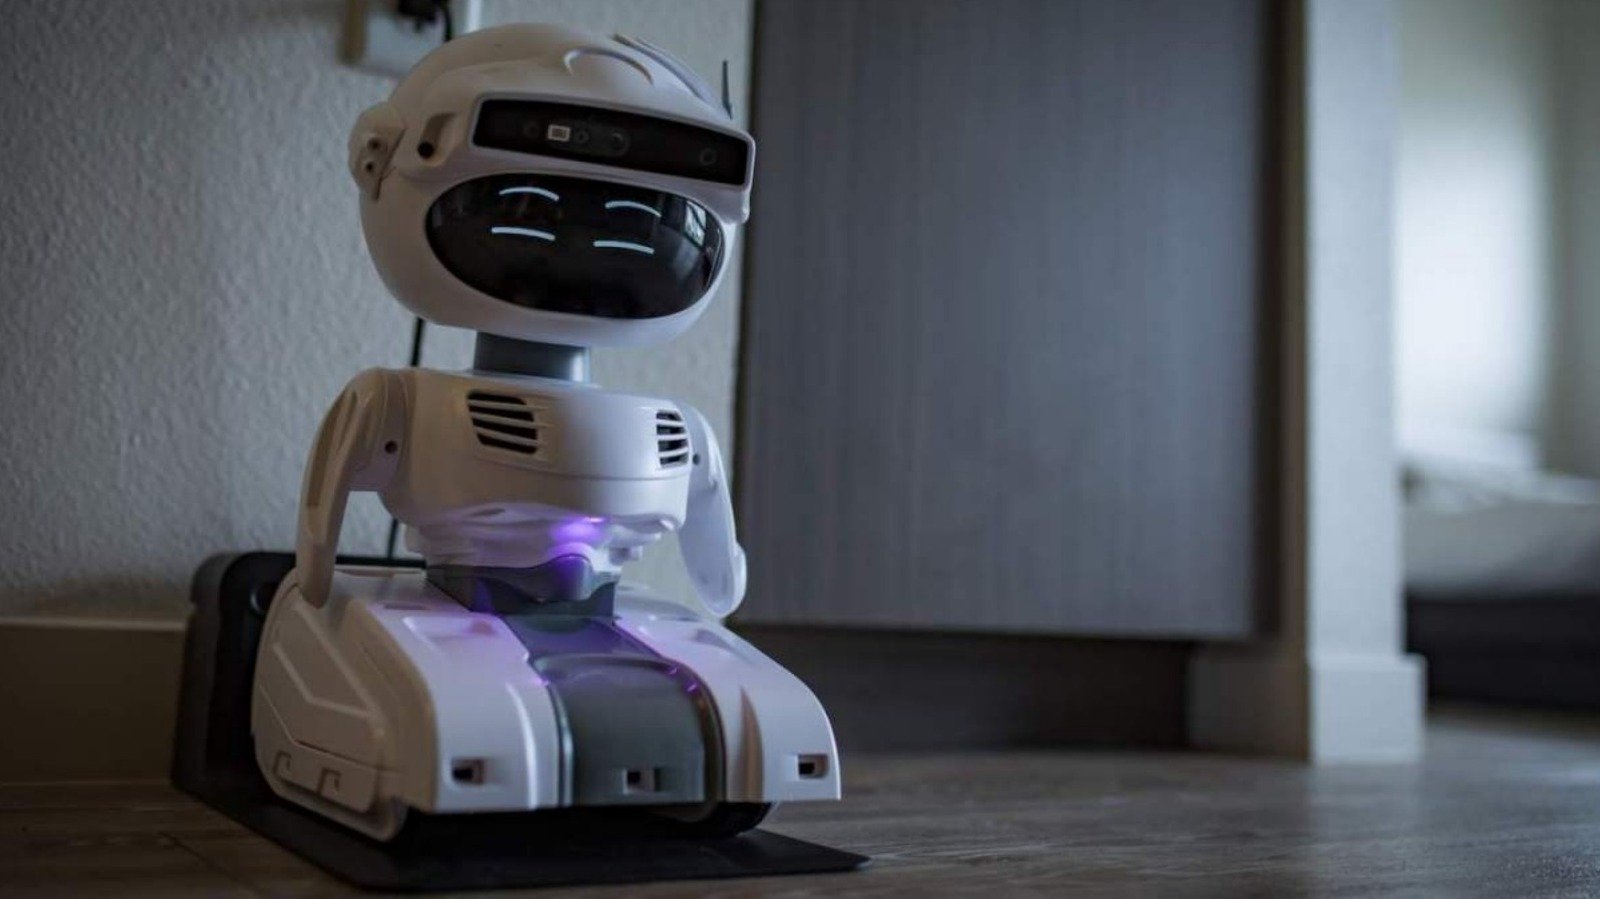 The Coolest Robots You Can Buy Today